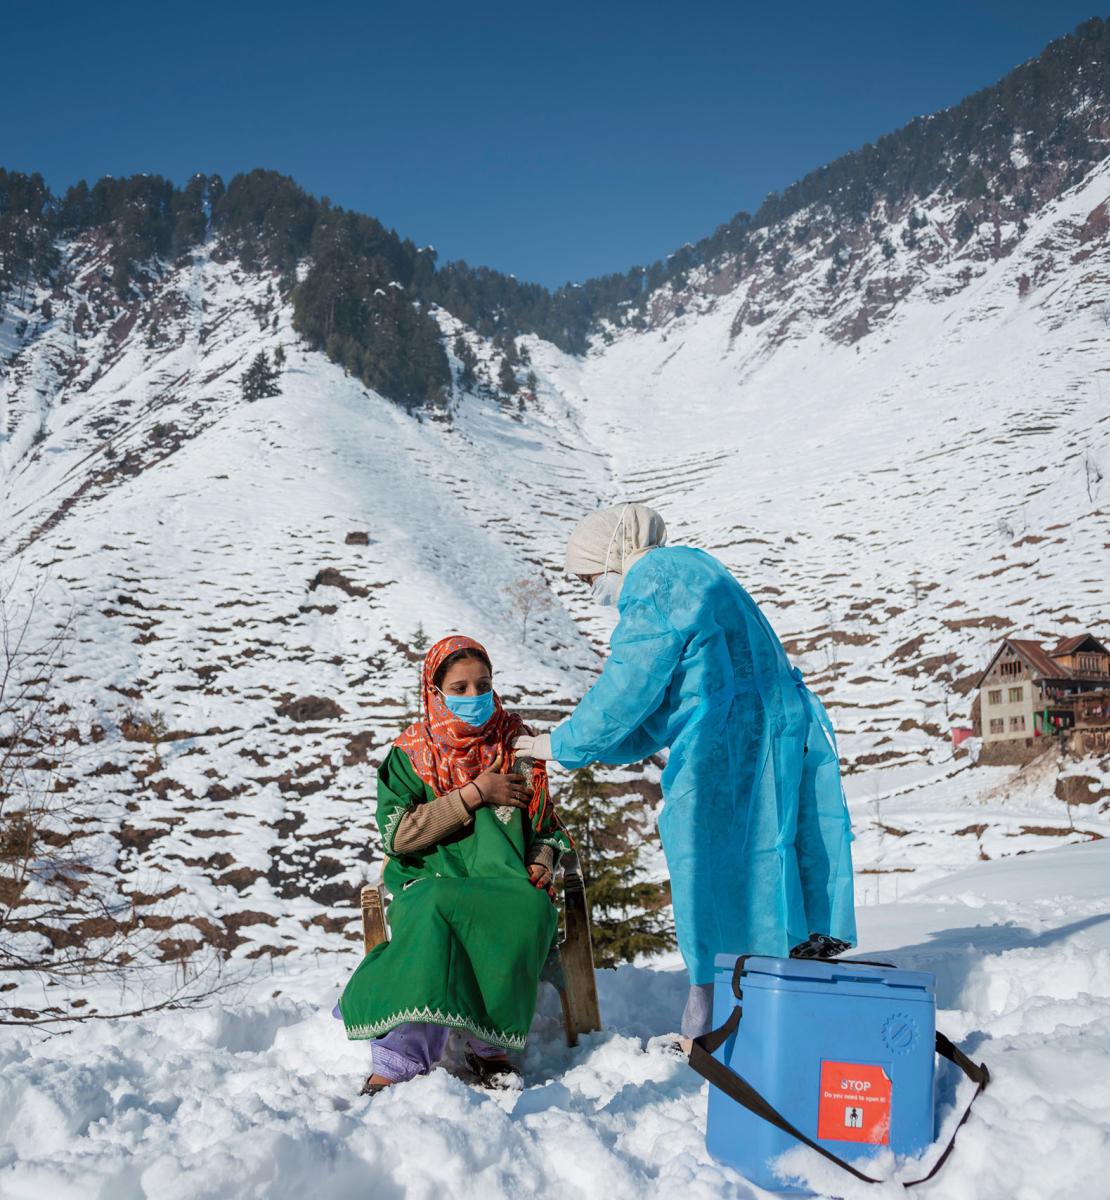 A woman gets vaccinated against COVID-19 on a snowy mountain top.